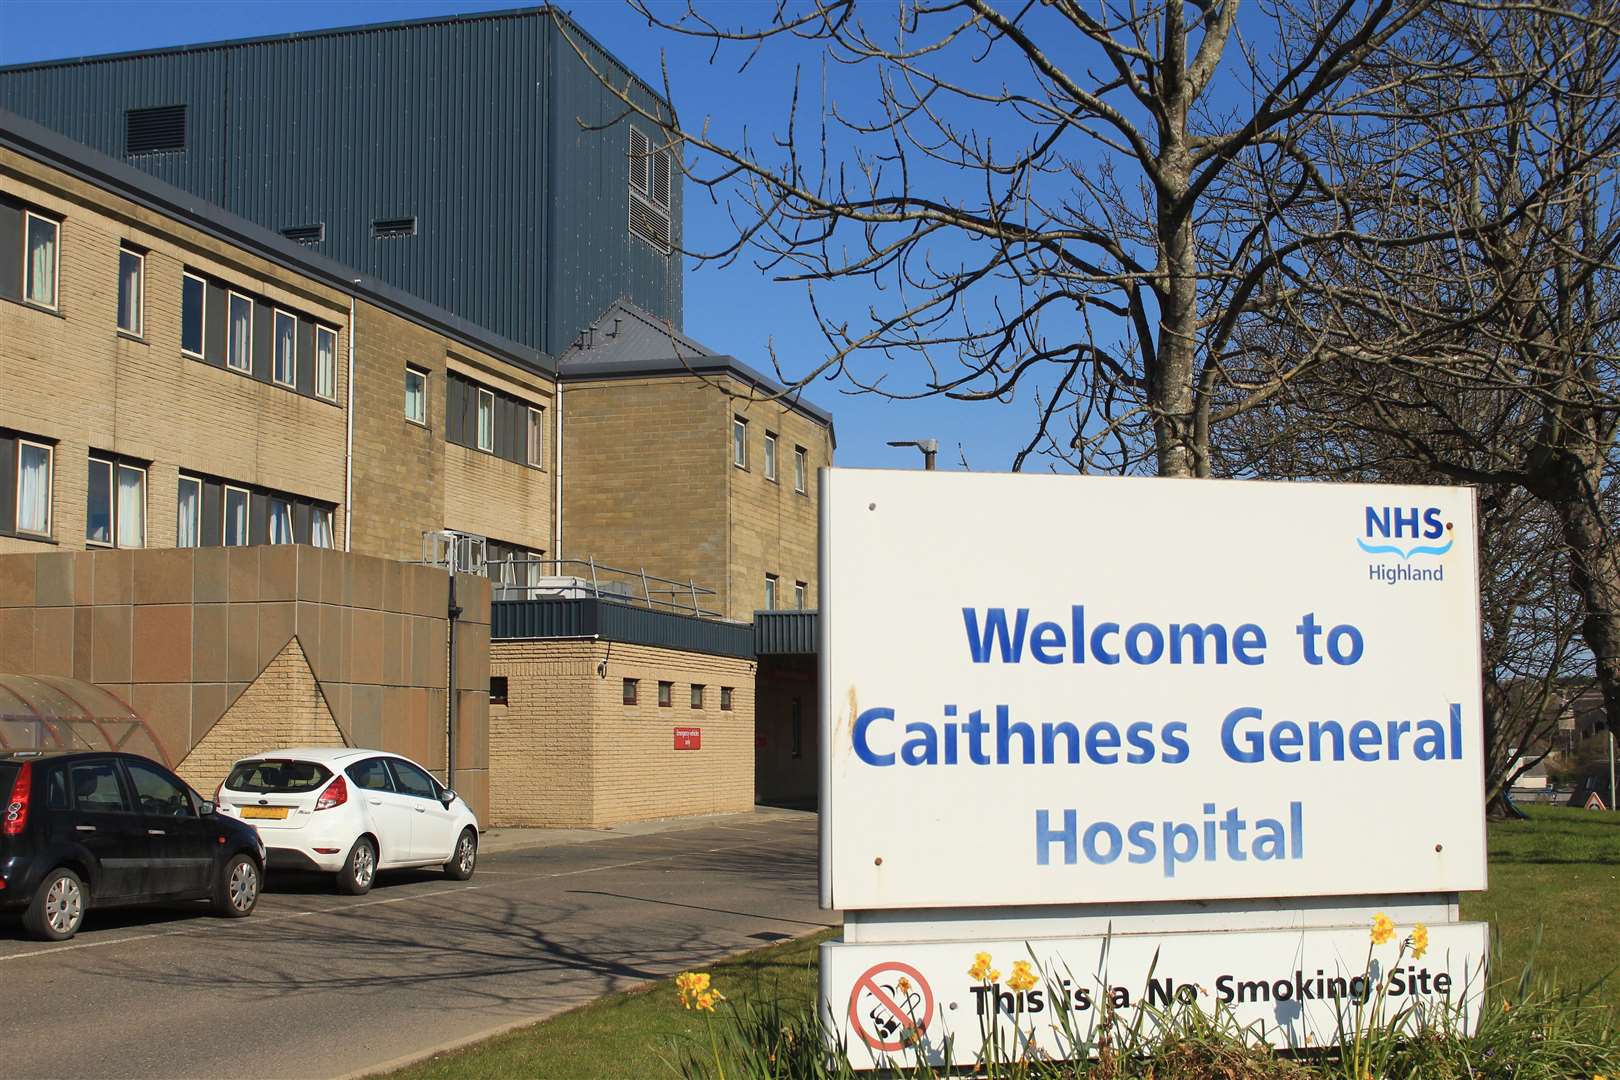 Police attended 14 'concern for person' incidents at Caithness General Hospital during 2022.